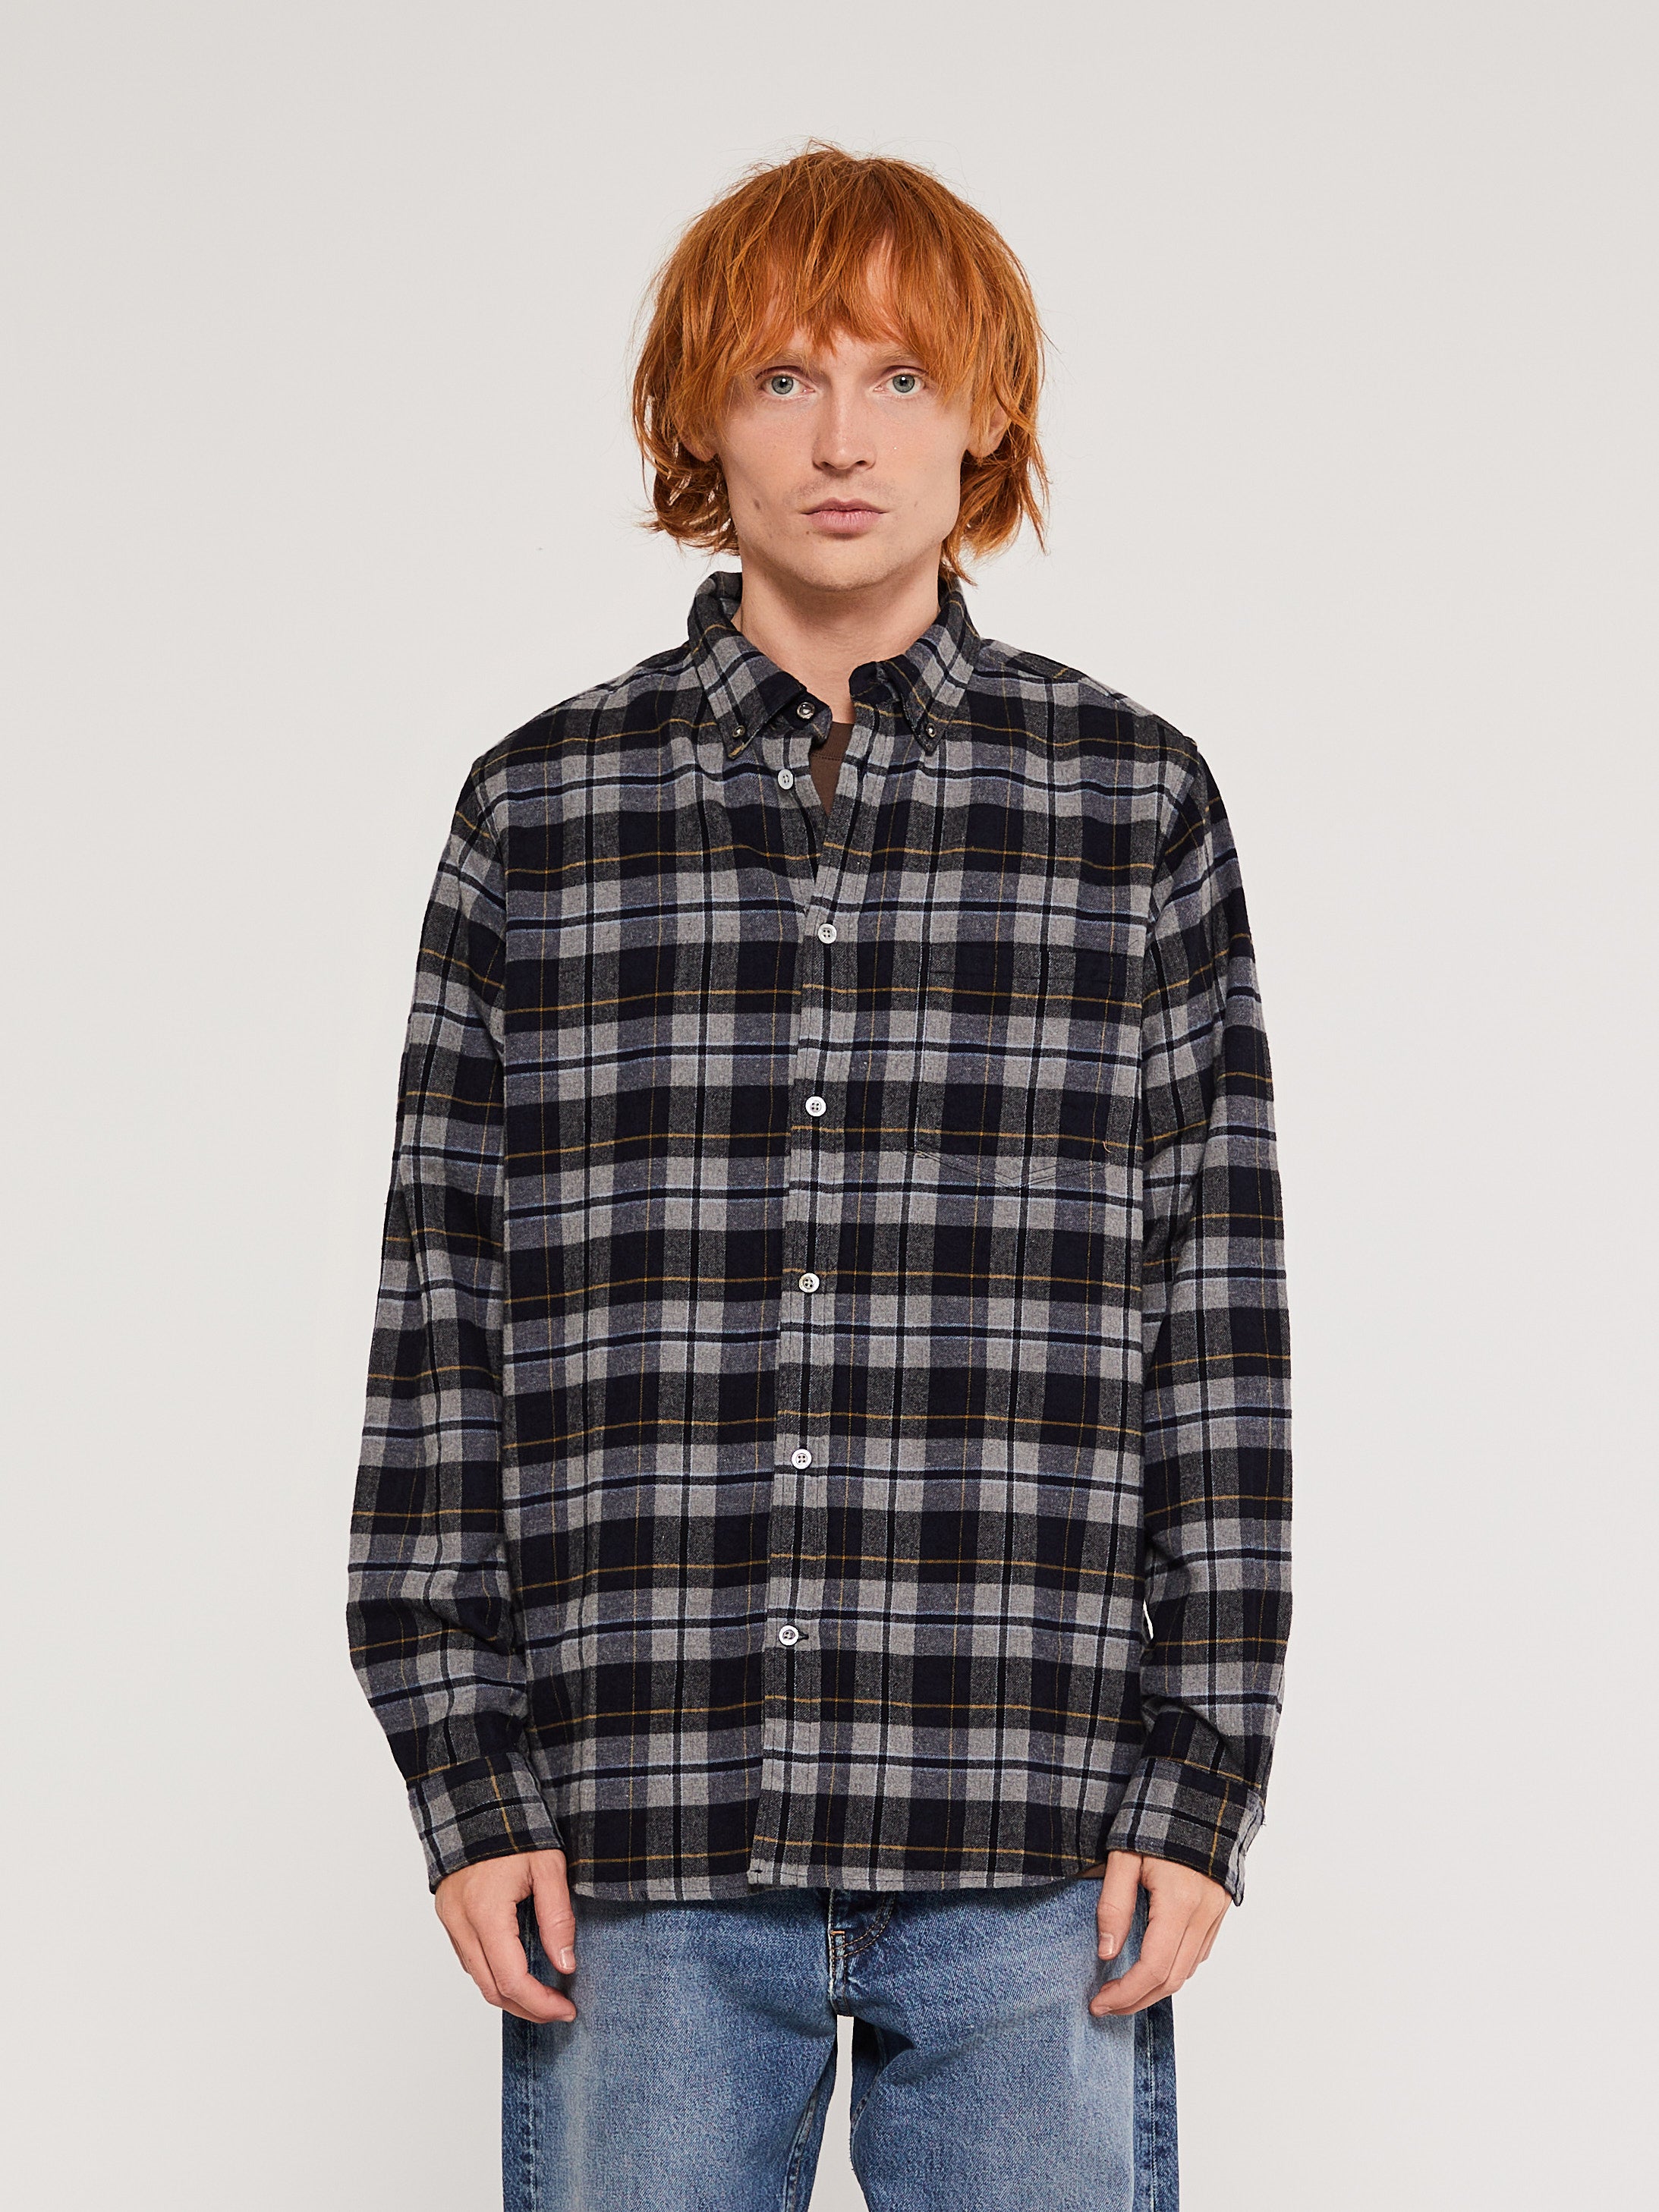 Norse Projects - Anton Check Shirt in Medium Grey